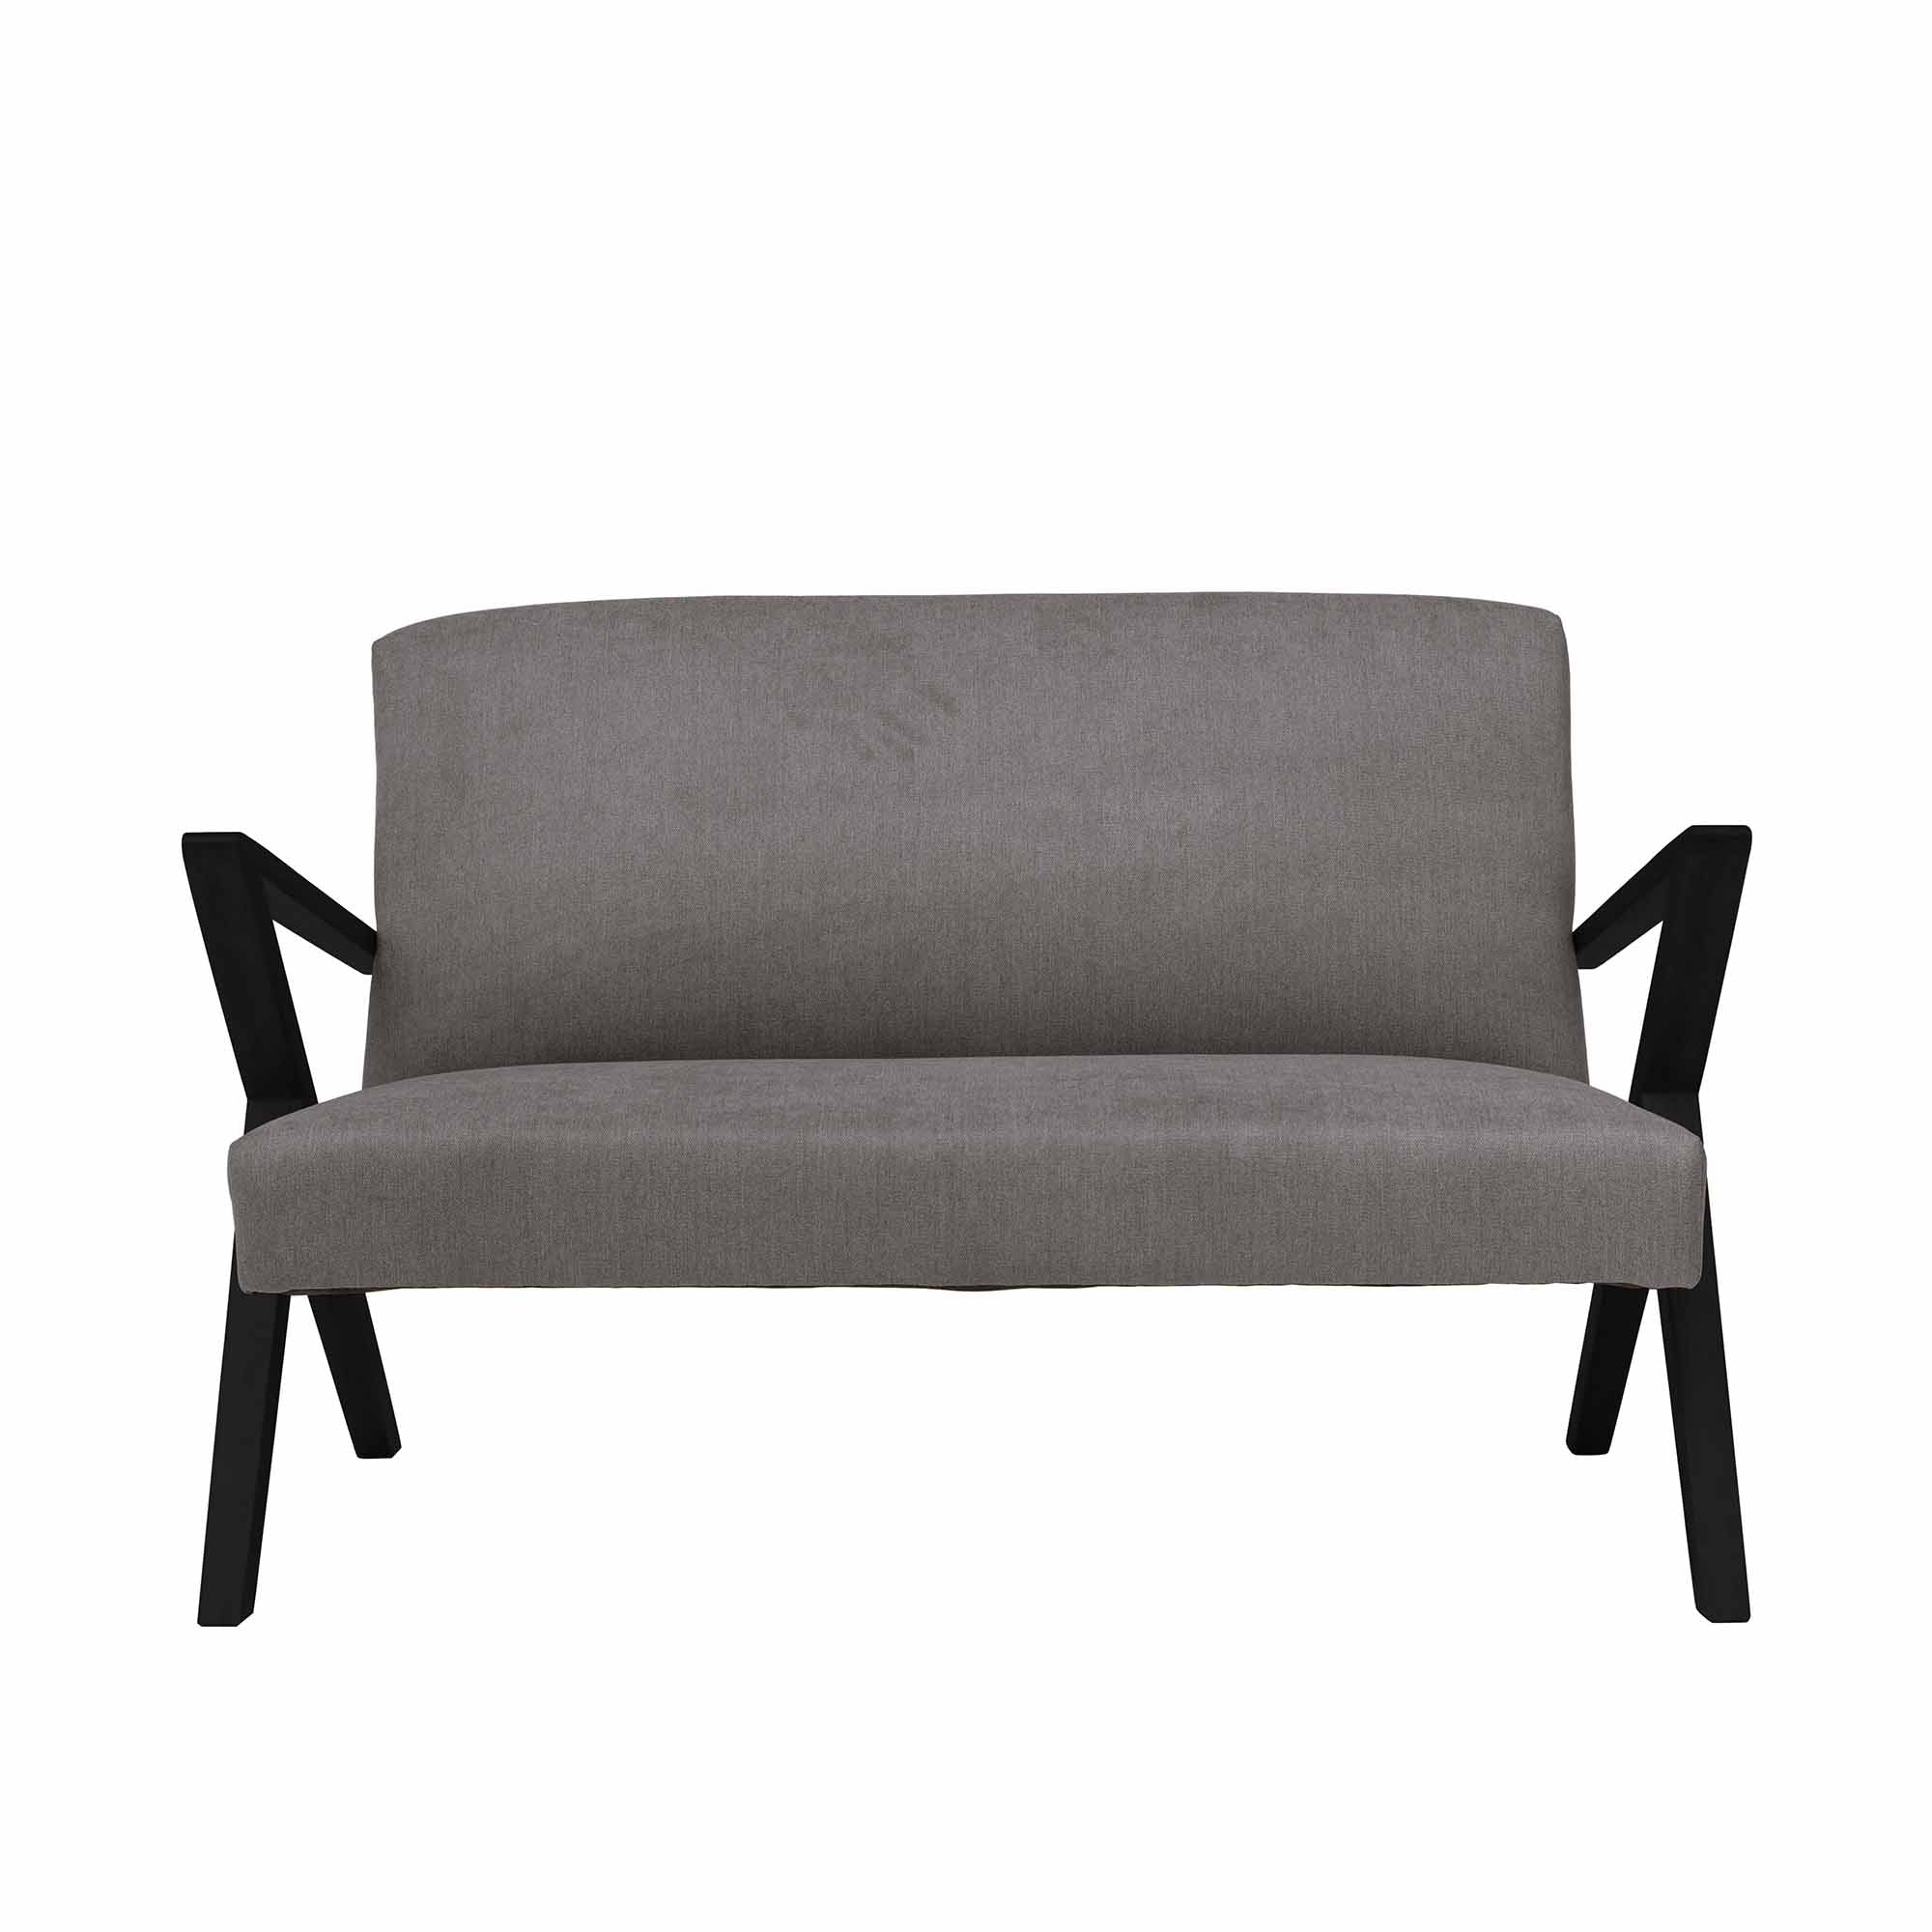 2-Seater Sofa, Beech Wood Frame, Black Lacquered grey fabric, front view